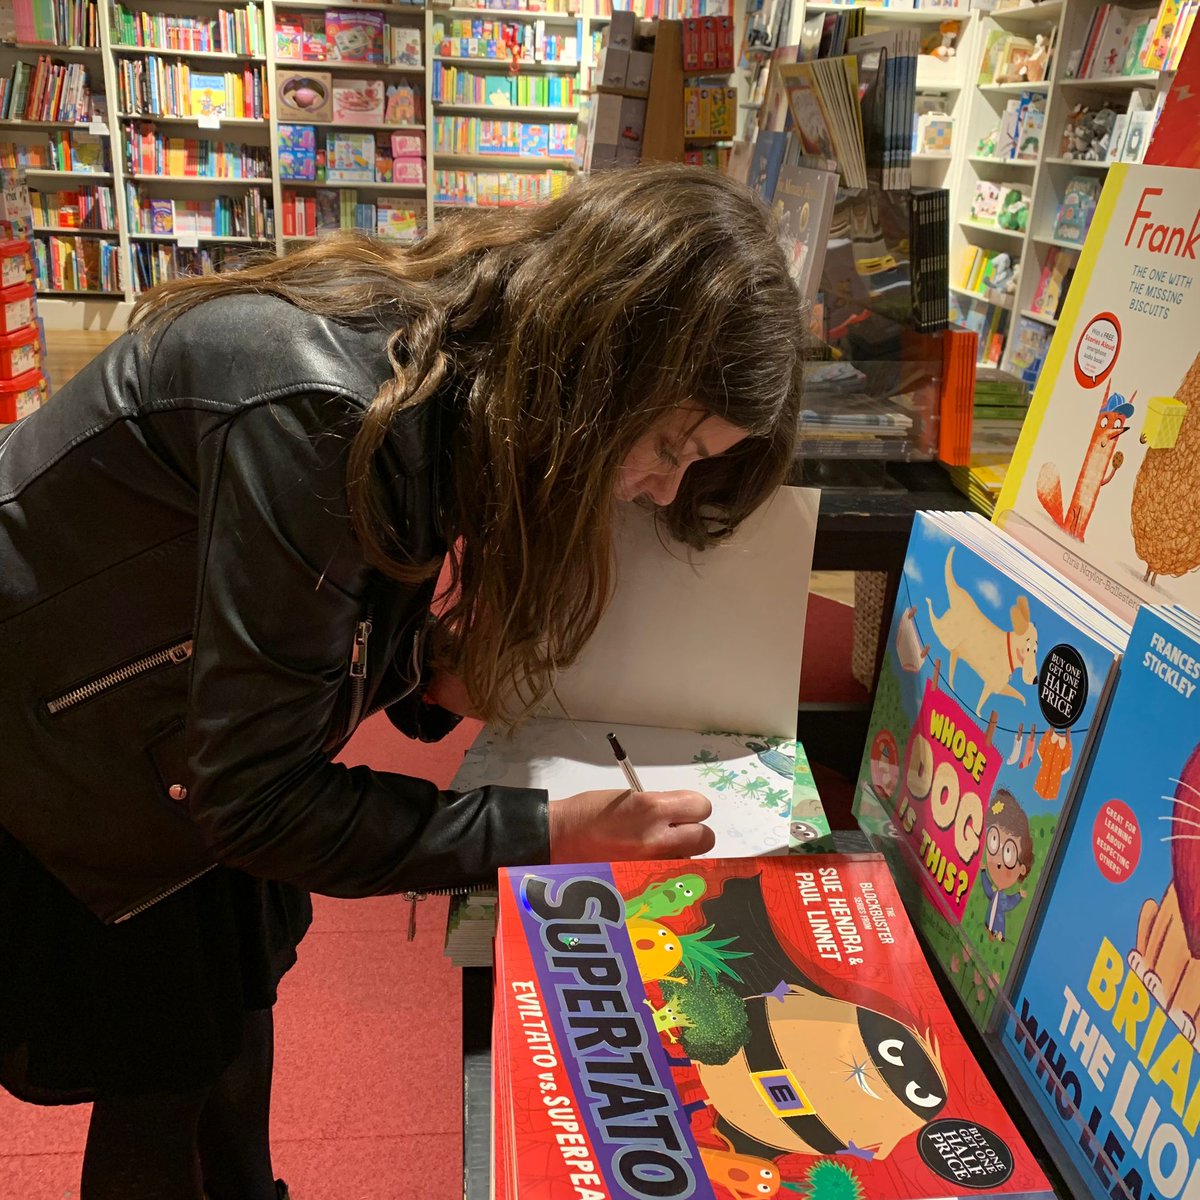 Thank you to Sarah Tagholm @mrstwit for popping in to see us and sign copies of her brilliant new picture book We Are the Wibbly! Teaching little ones about the life cycles of the natural world and also how to cope with their own anxiety about change. Signed copies in store!